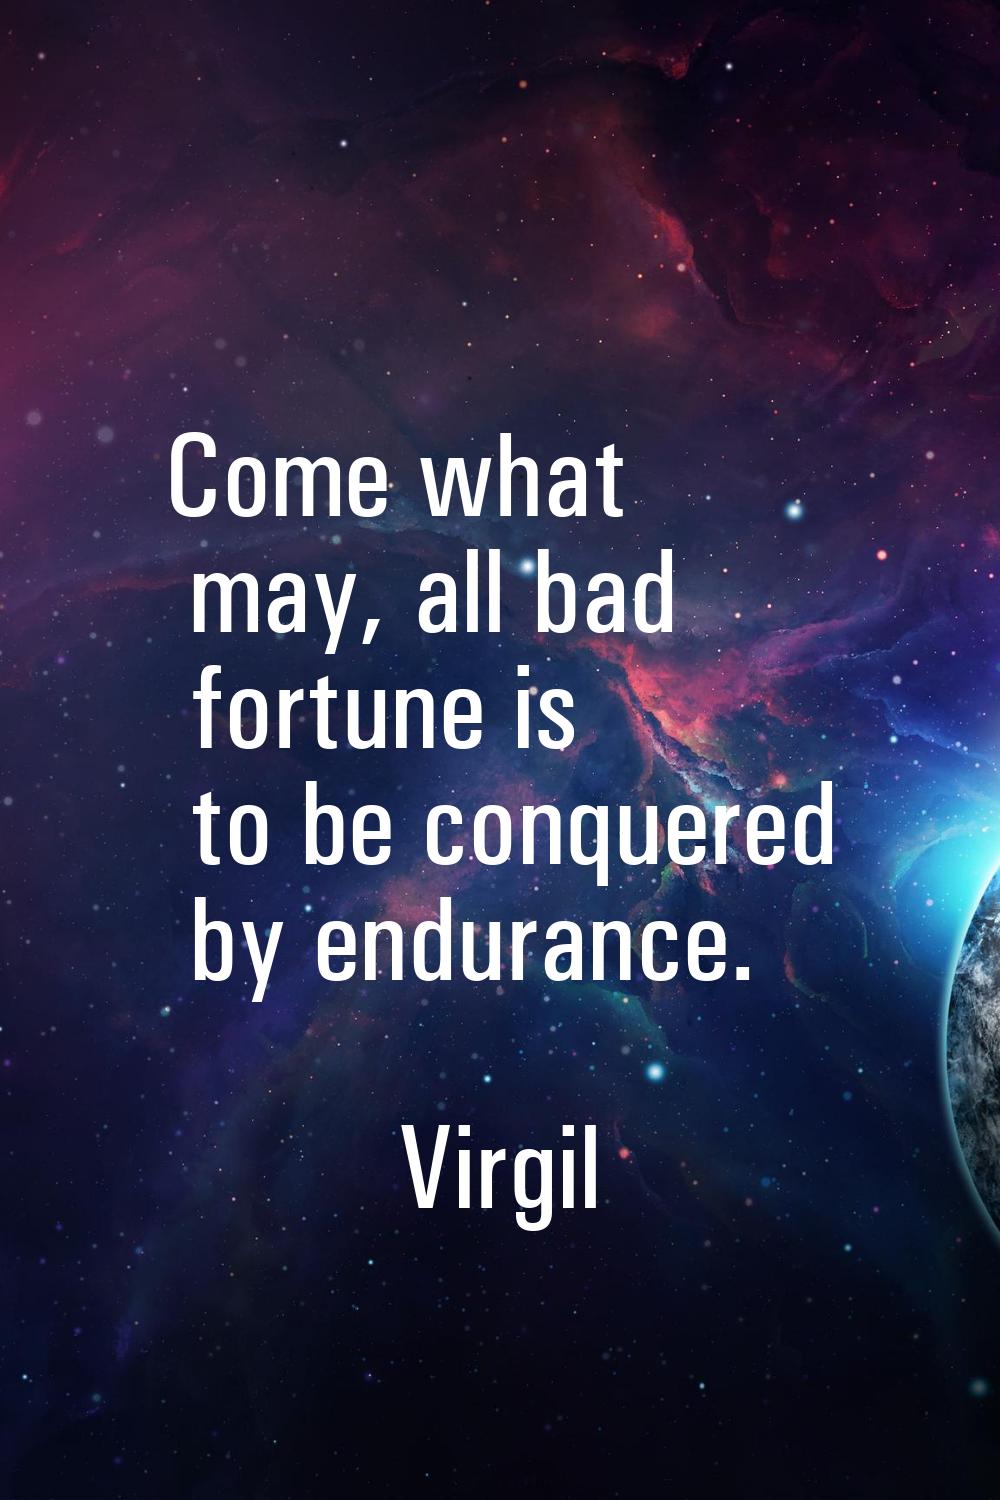 Come what may, all bad fortune is to be conquered by endurance.